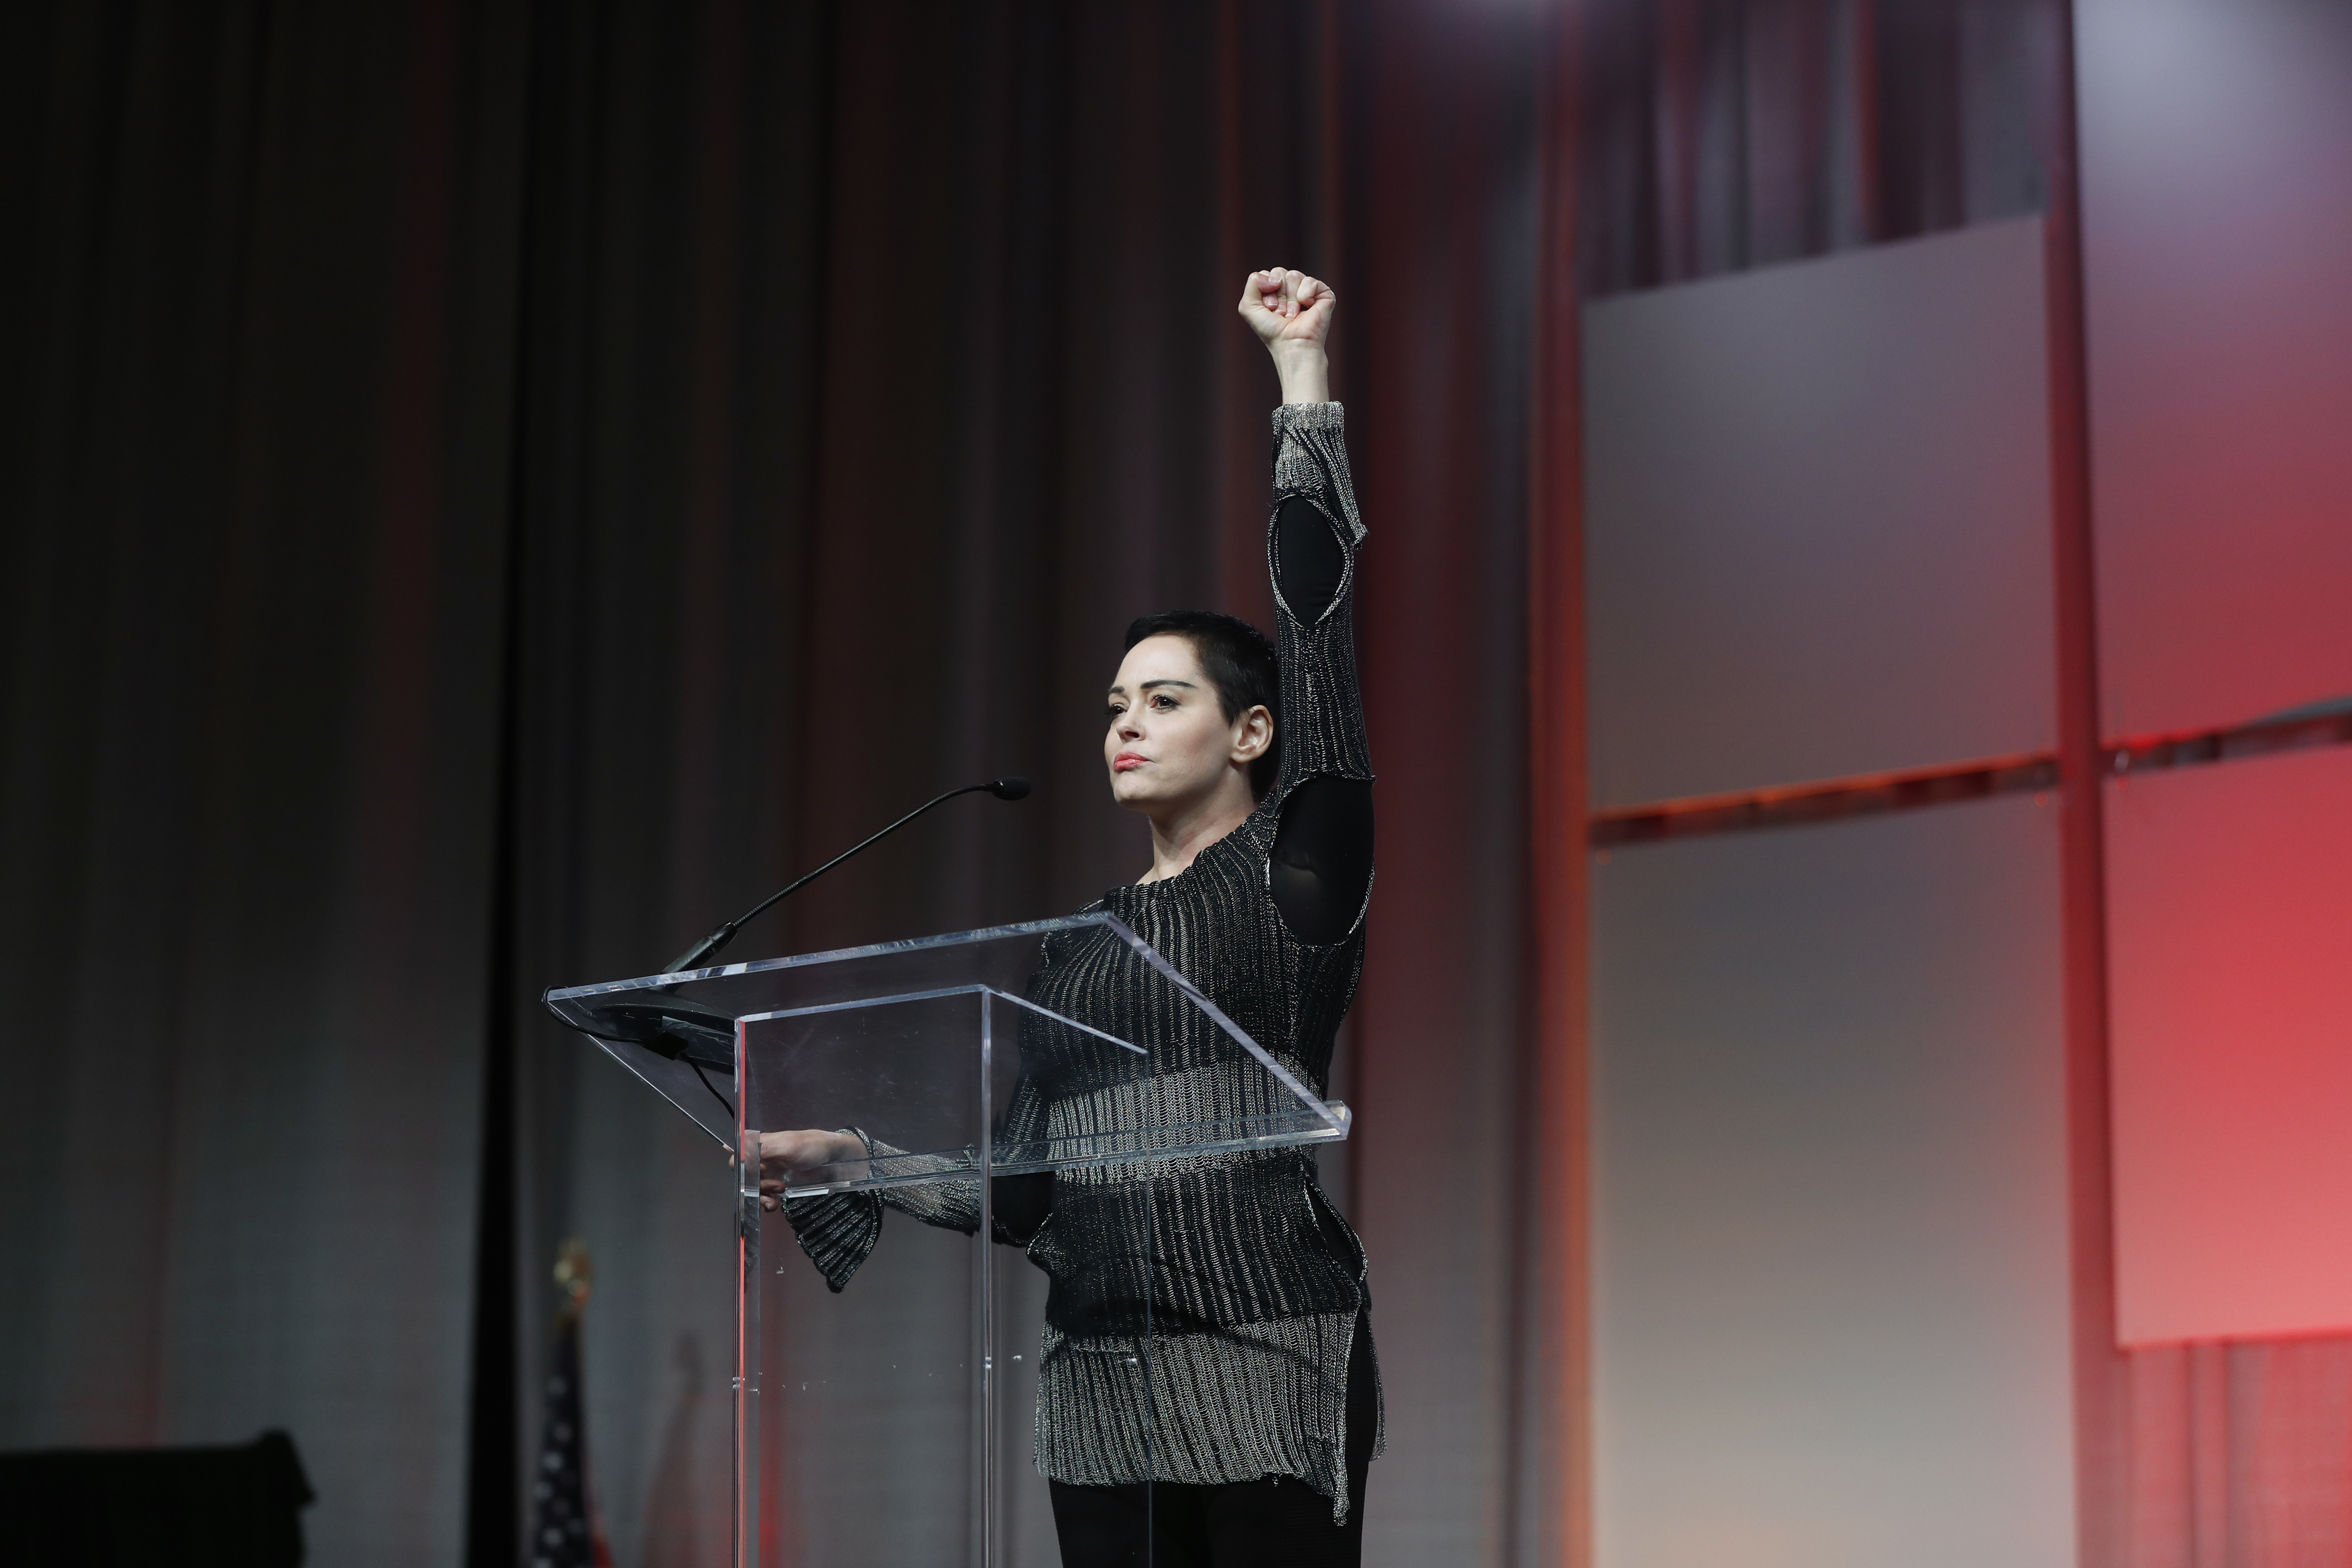 Actress Rose McGowan speaks at the inaugural Women's Convention in Detroit in October 2017, shortly after going public with her allegation that producer Harvey Weinstein raped her. The GDPR could prevent stories relying on tremendous amounts of personal data—such as the Pulitzer-winning #MeToo series, based on the allegations of McGowan and others—from being seen